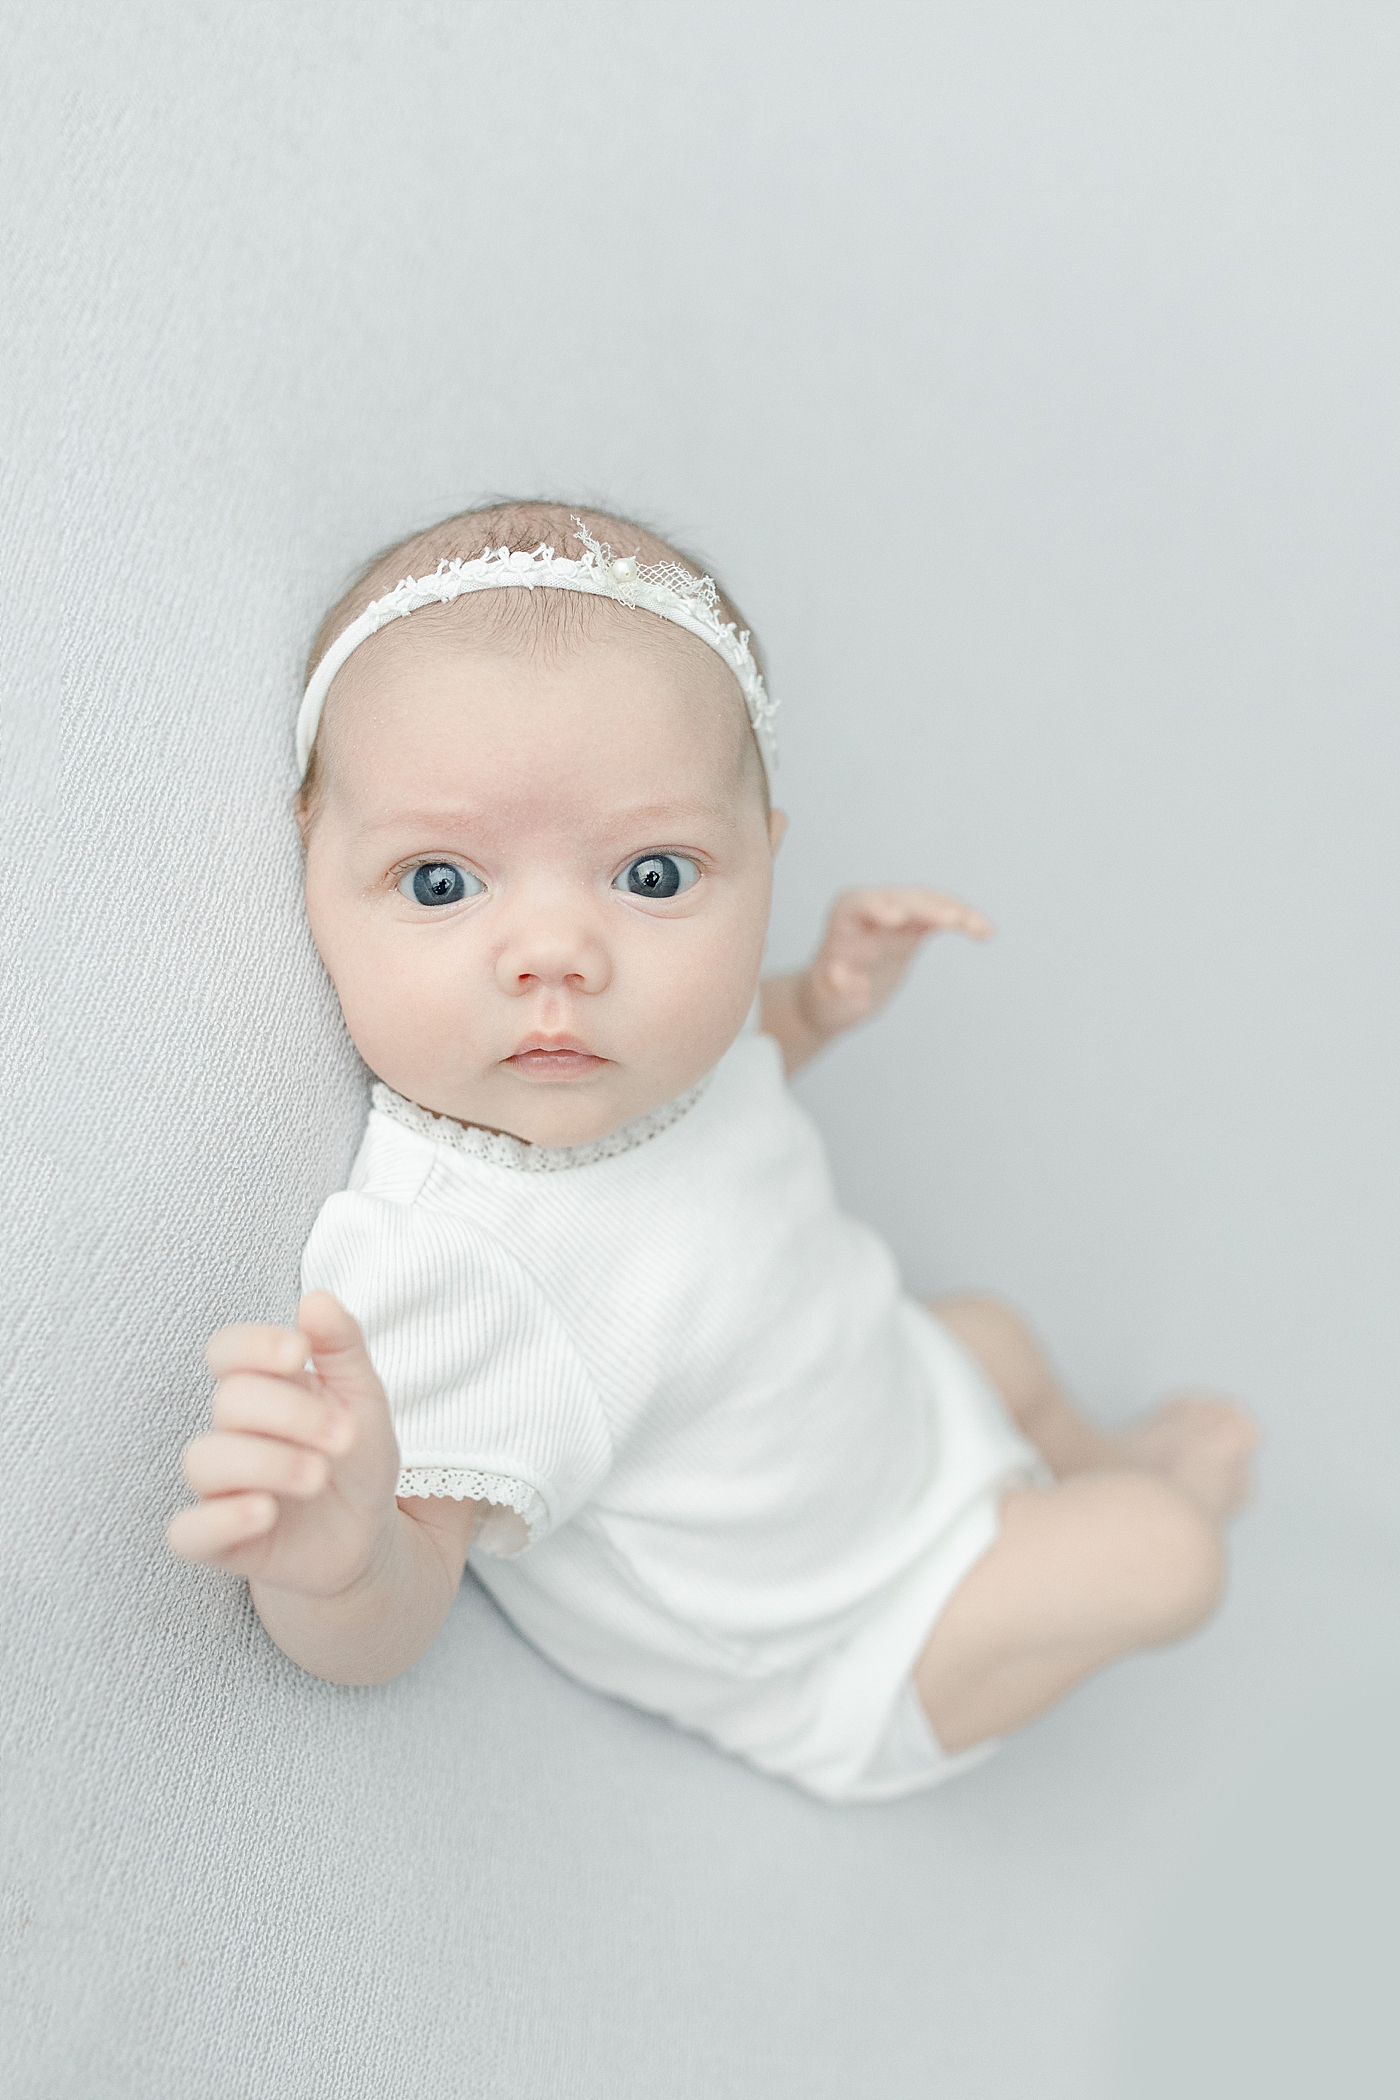 Blue eyed baby girl in white looking at the camera | Photo by Little Sunshine Photography 